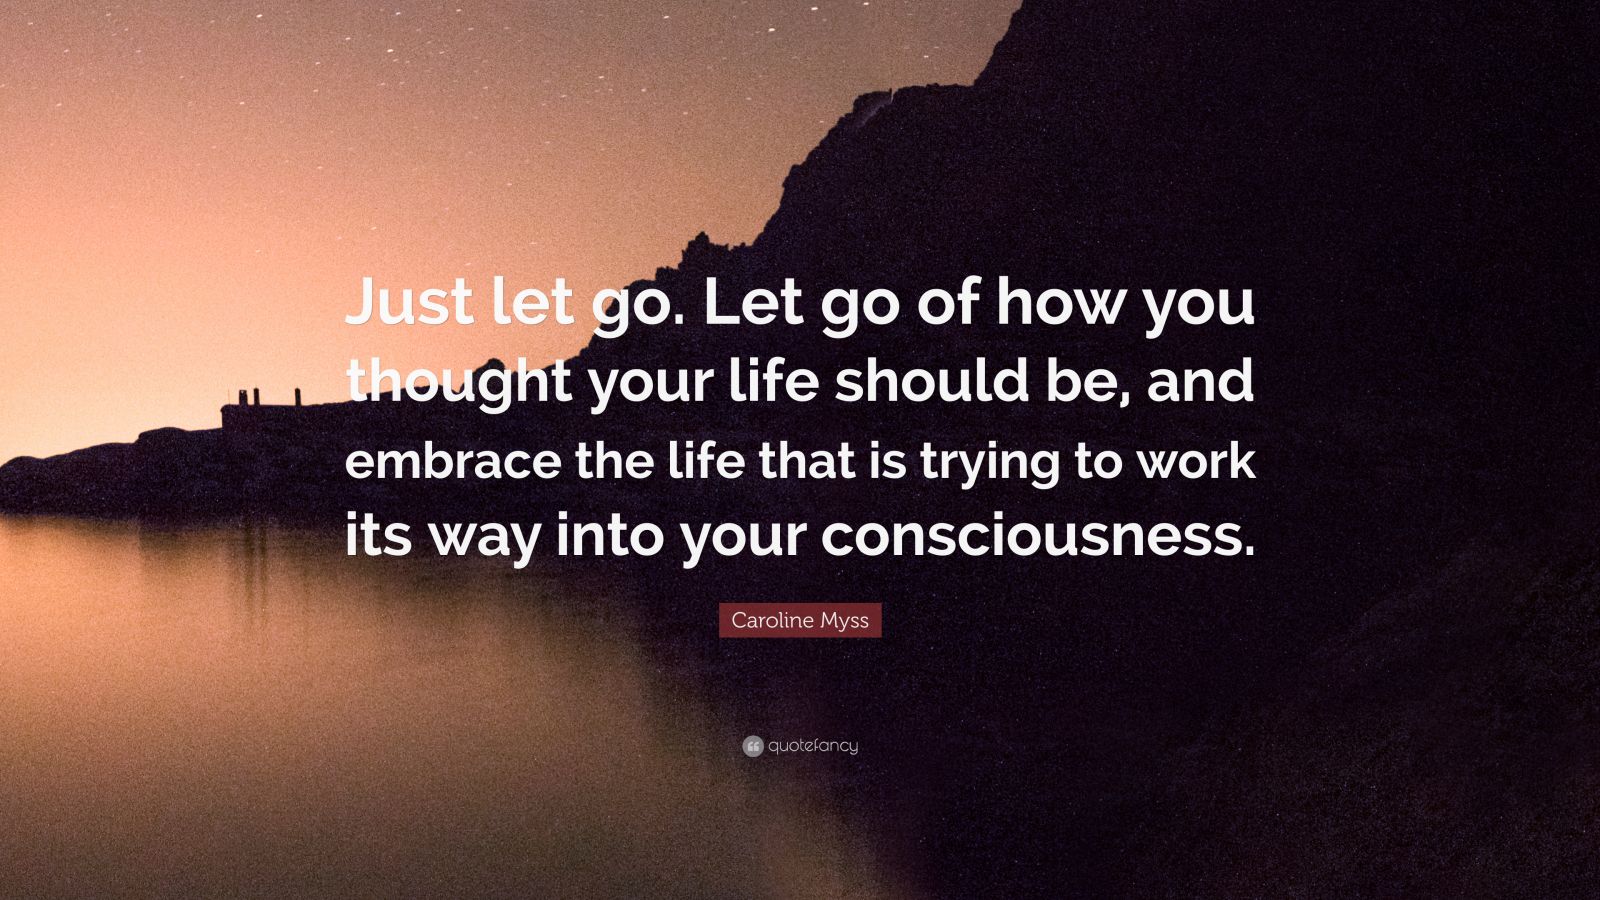 Caroline Myss Quote: “Just let go. Let go of how you thought your life ...